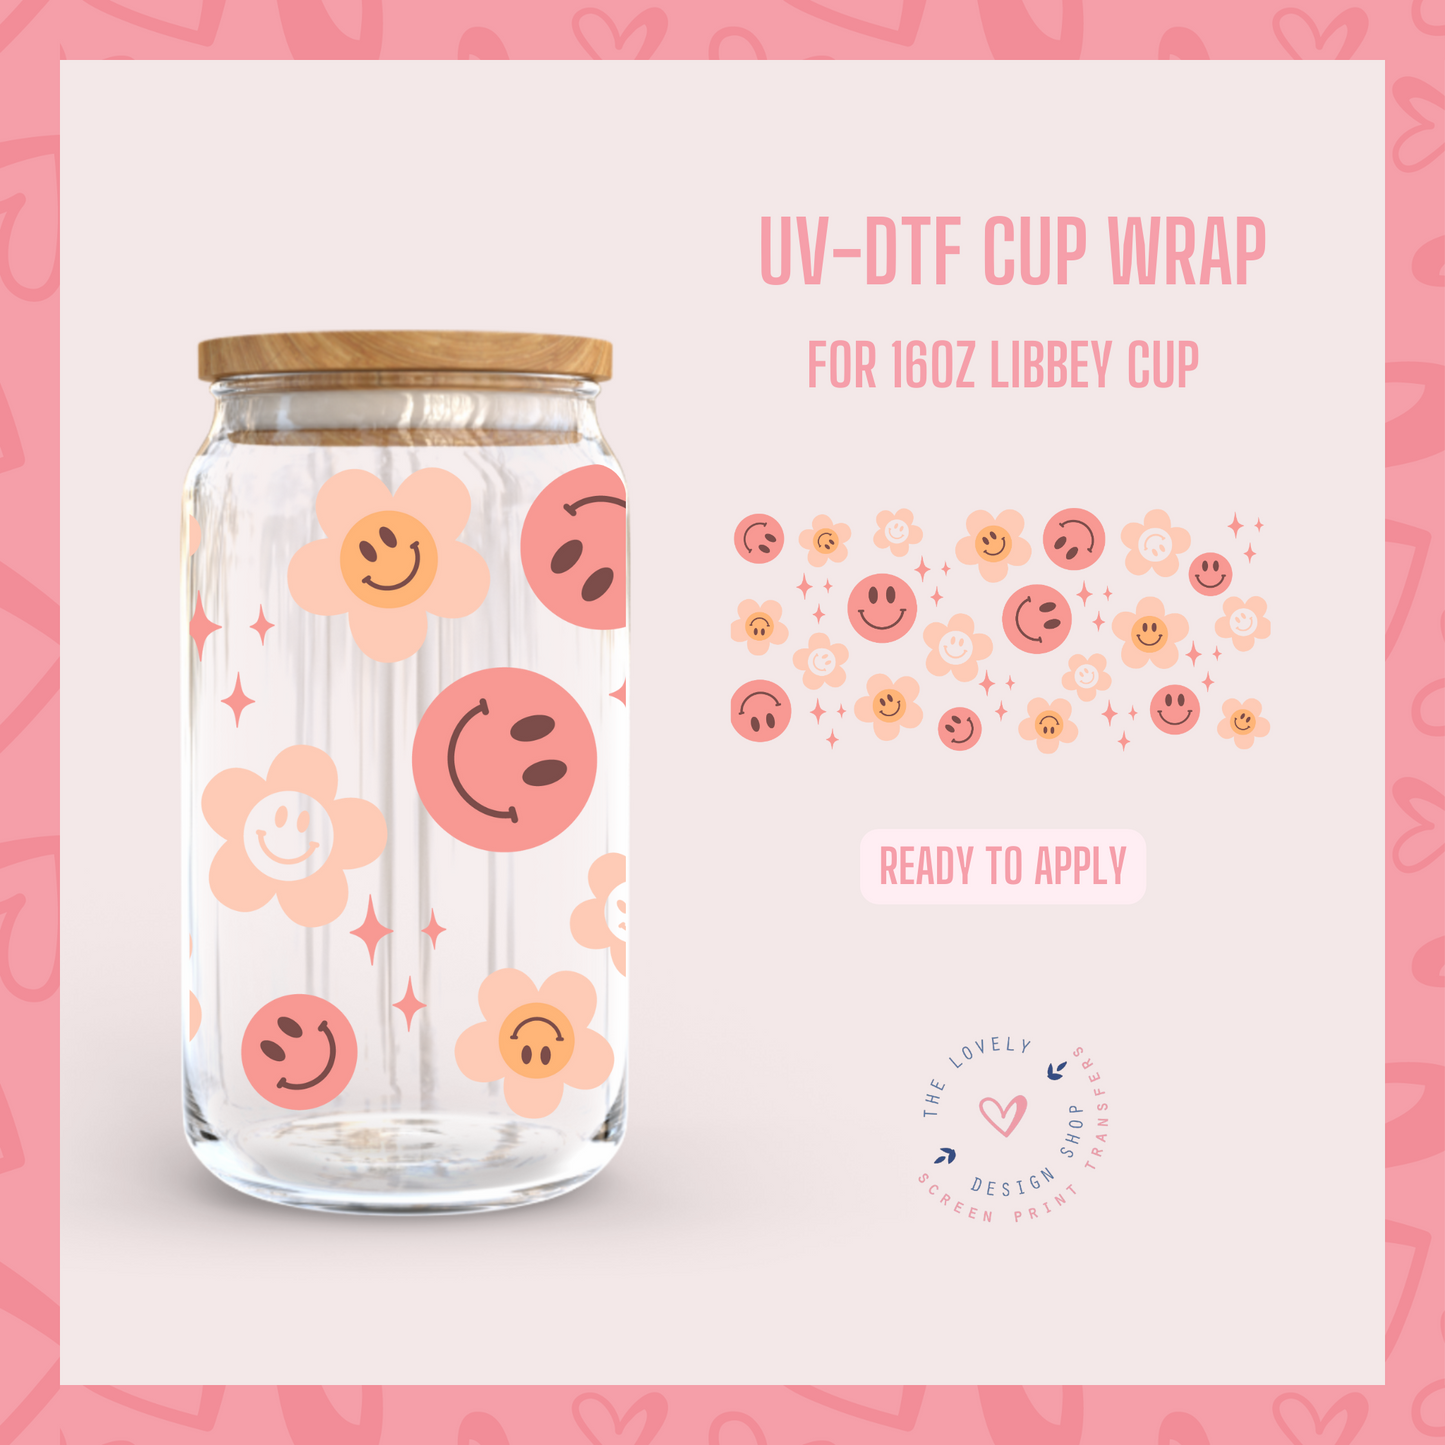 Smileys and Daisies - UV DTF 16 oz Libbey Cup Wrap (Ready to Ship)